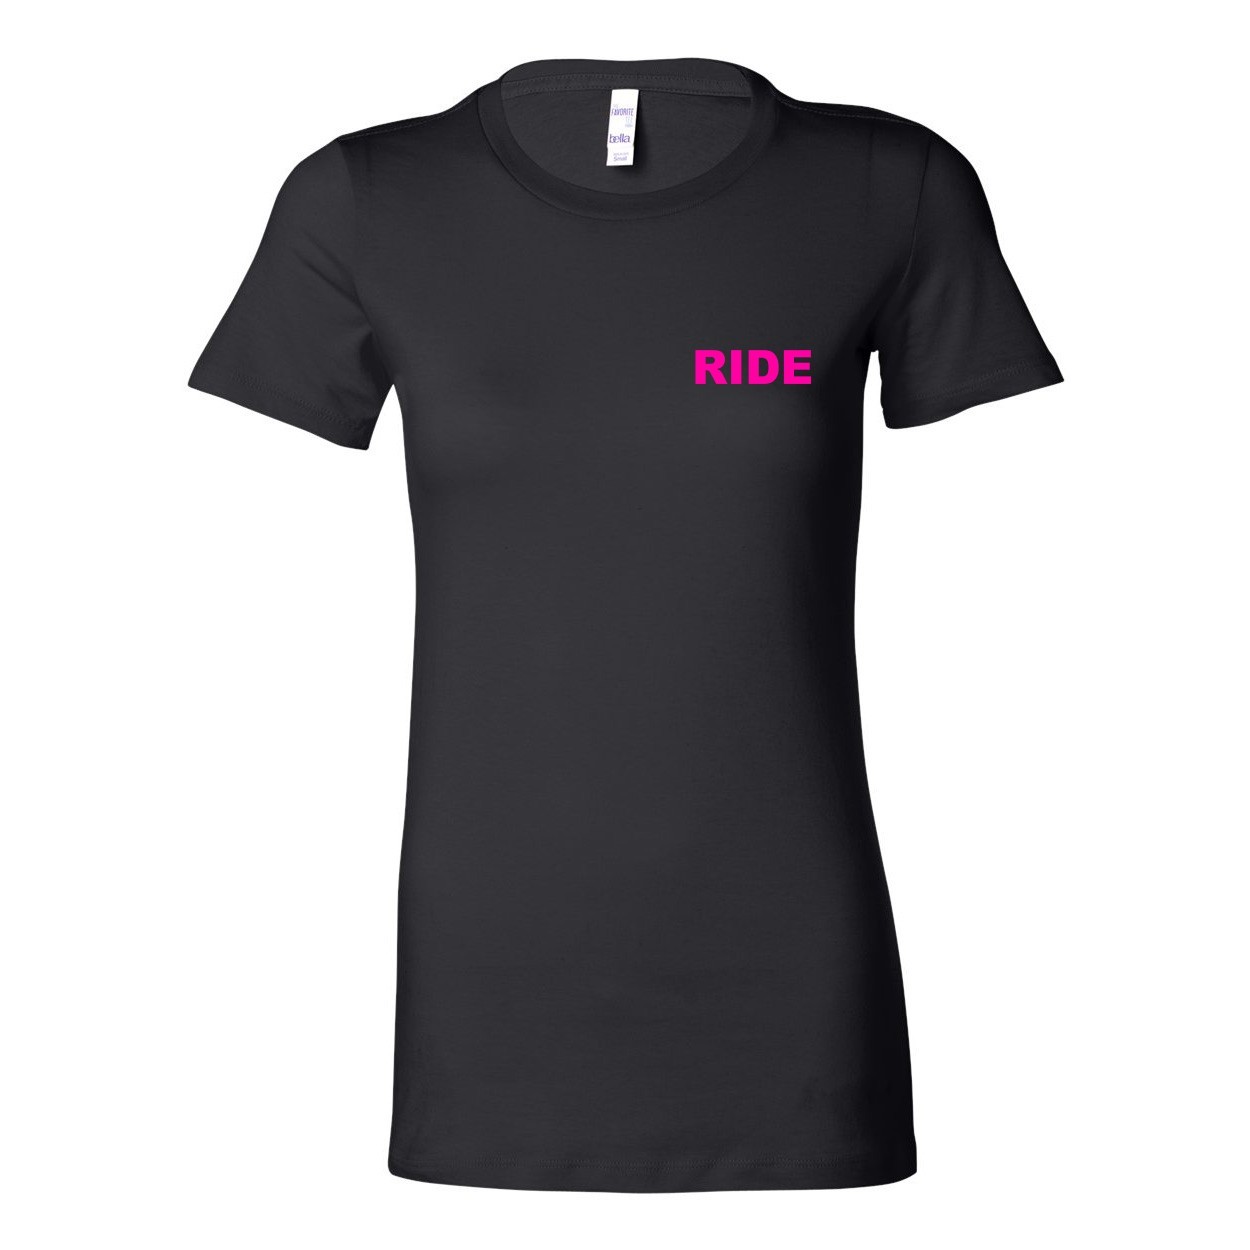 Ride Brand Logo Women's Night Out Fitted Tri-Blend T-Shirt Black (Pink Logo)